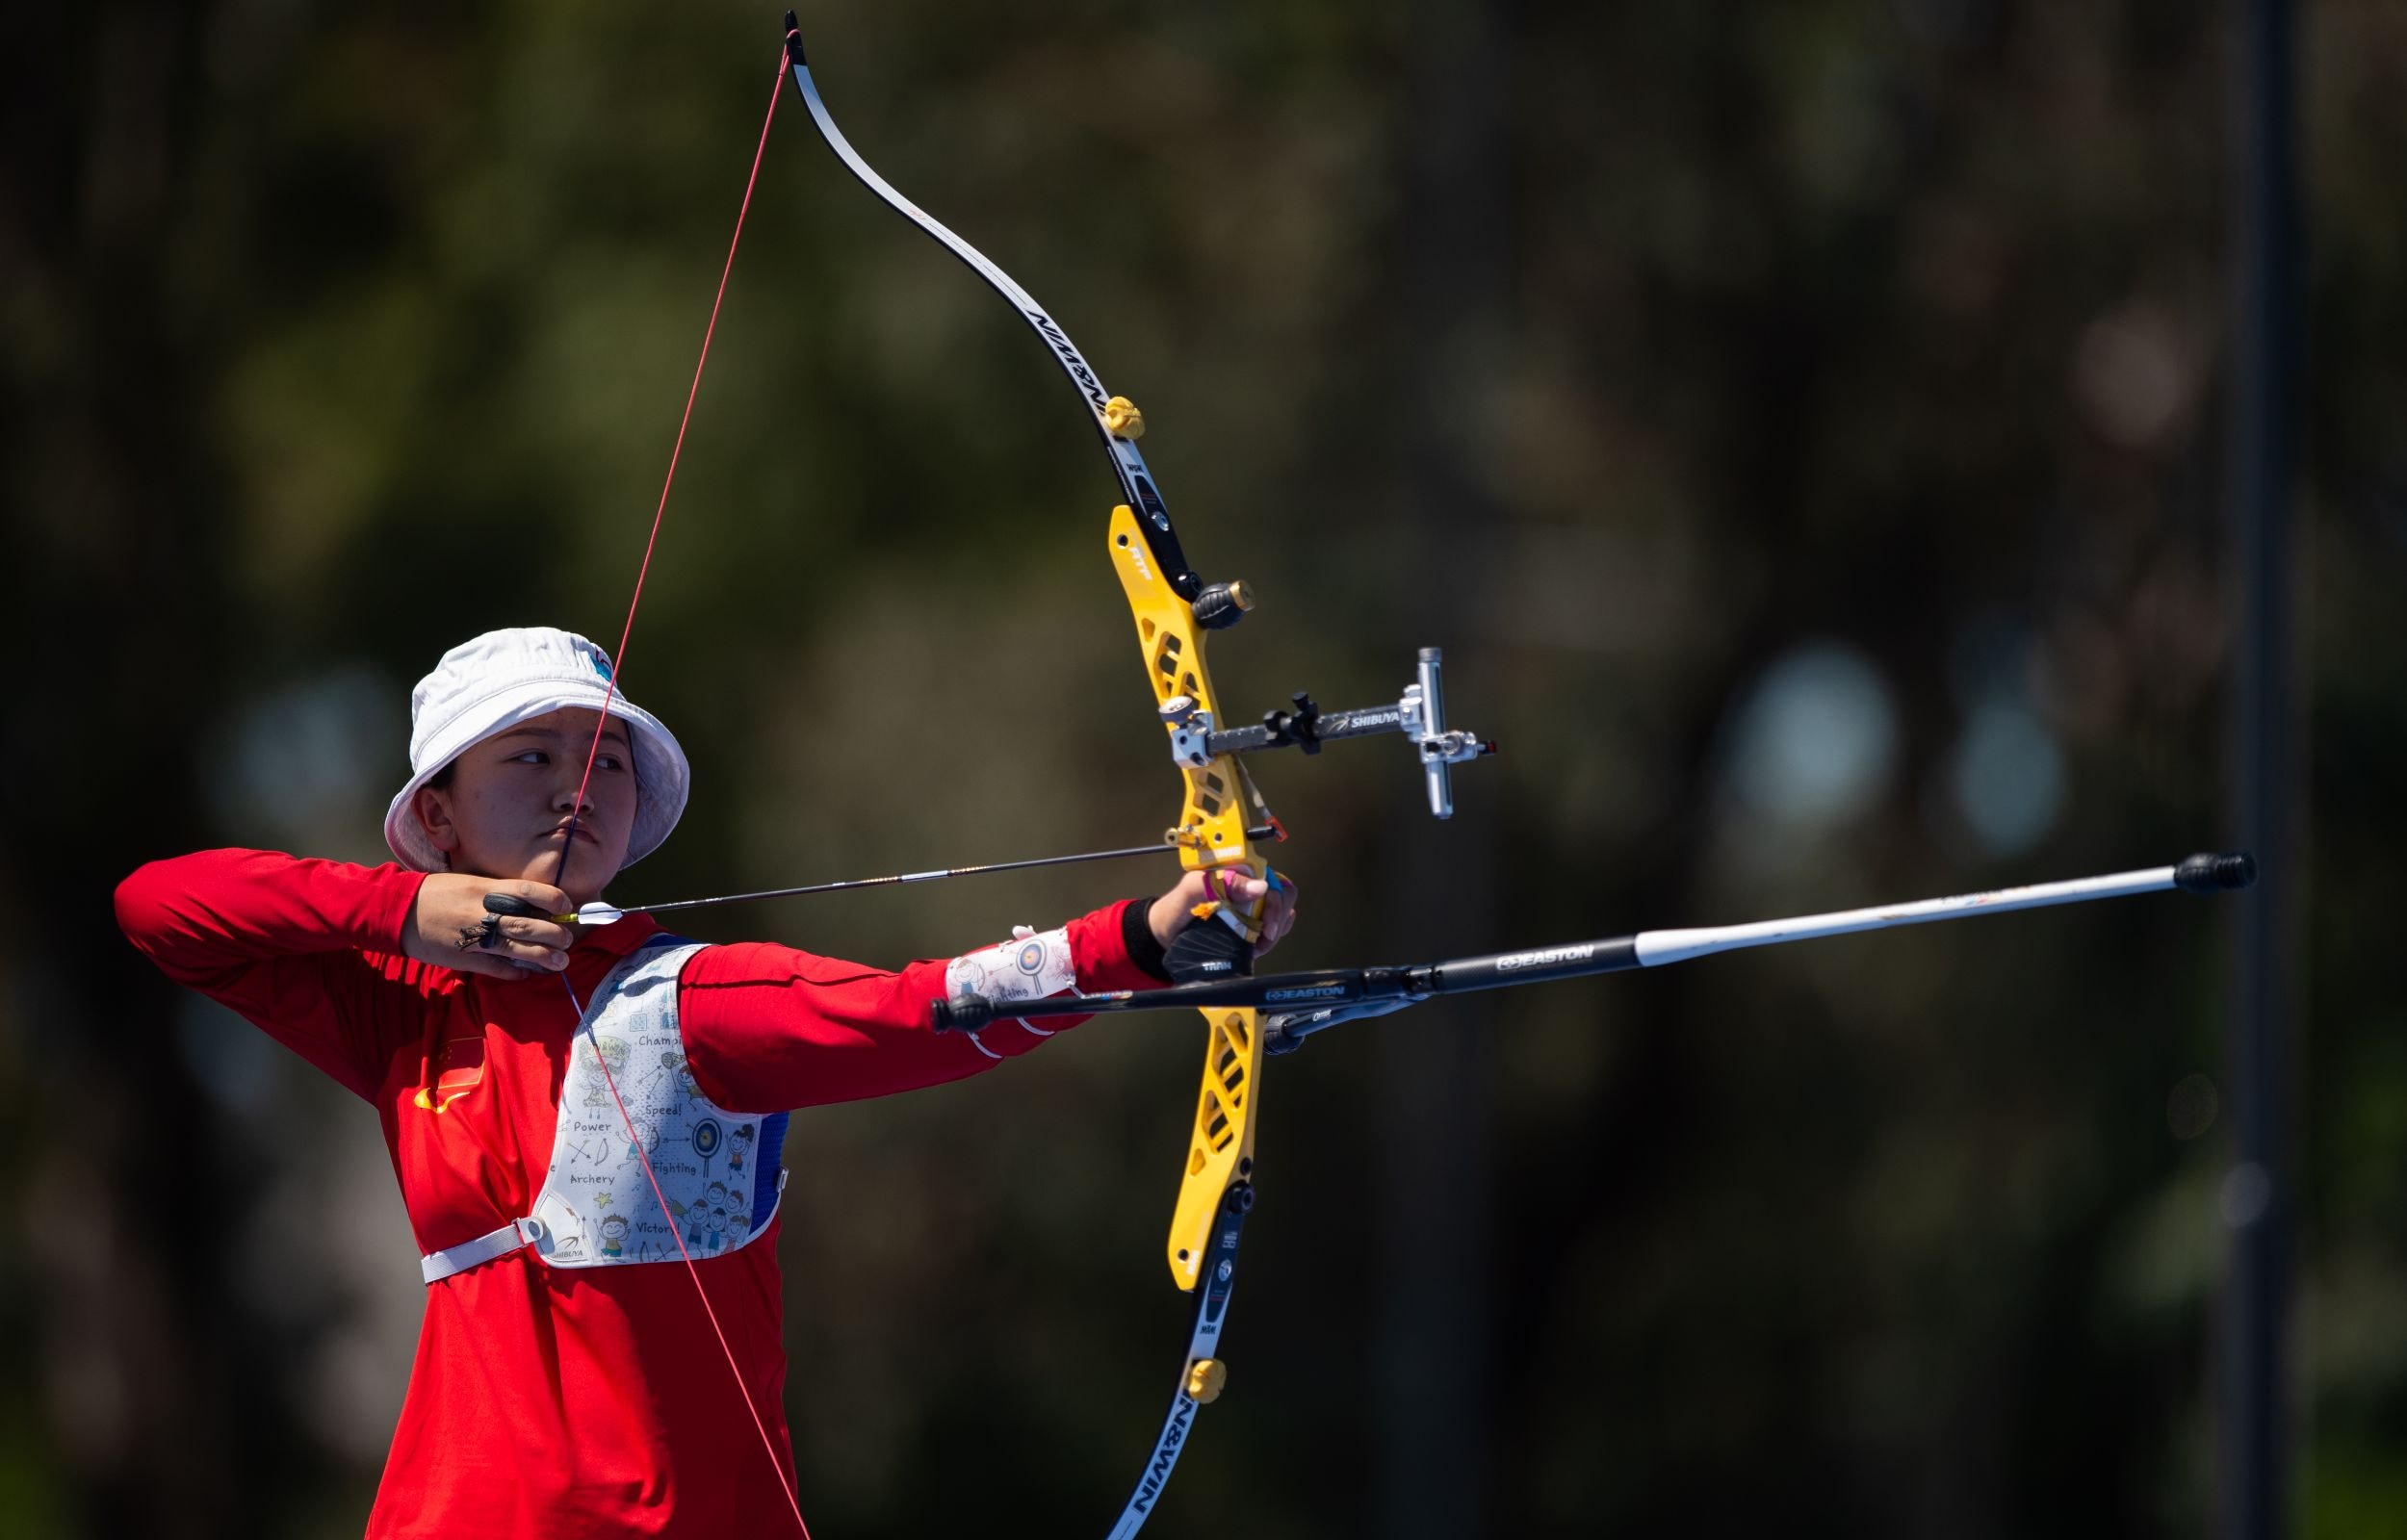 Buenos Aires 2018 - Archery - Women’s Recurve Individual